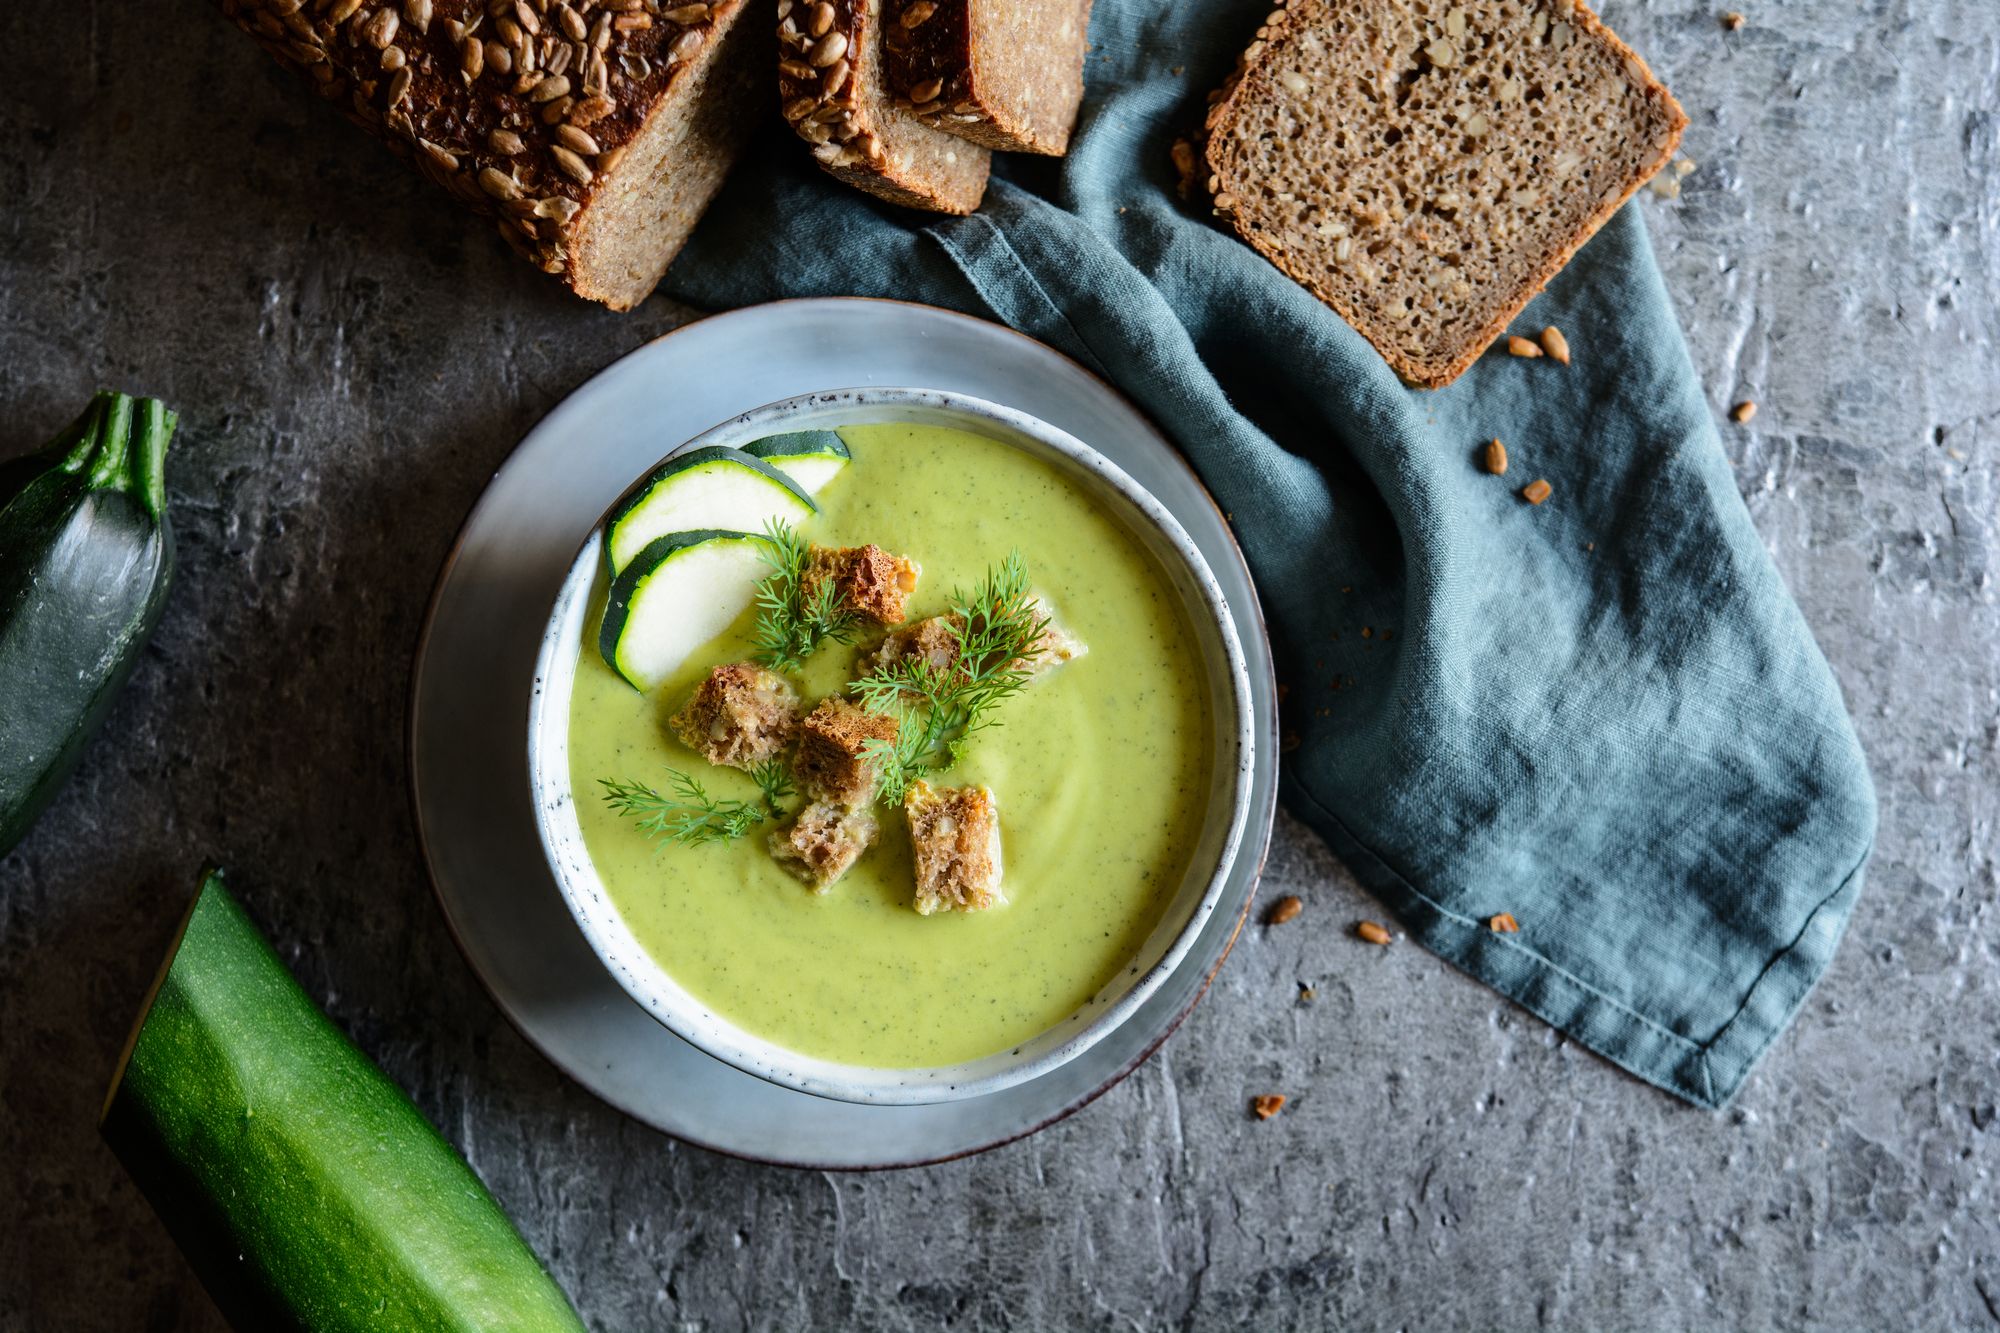 Leek, Goats’ Cheese, and Courgette Soup